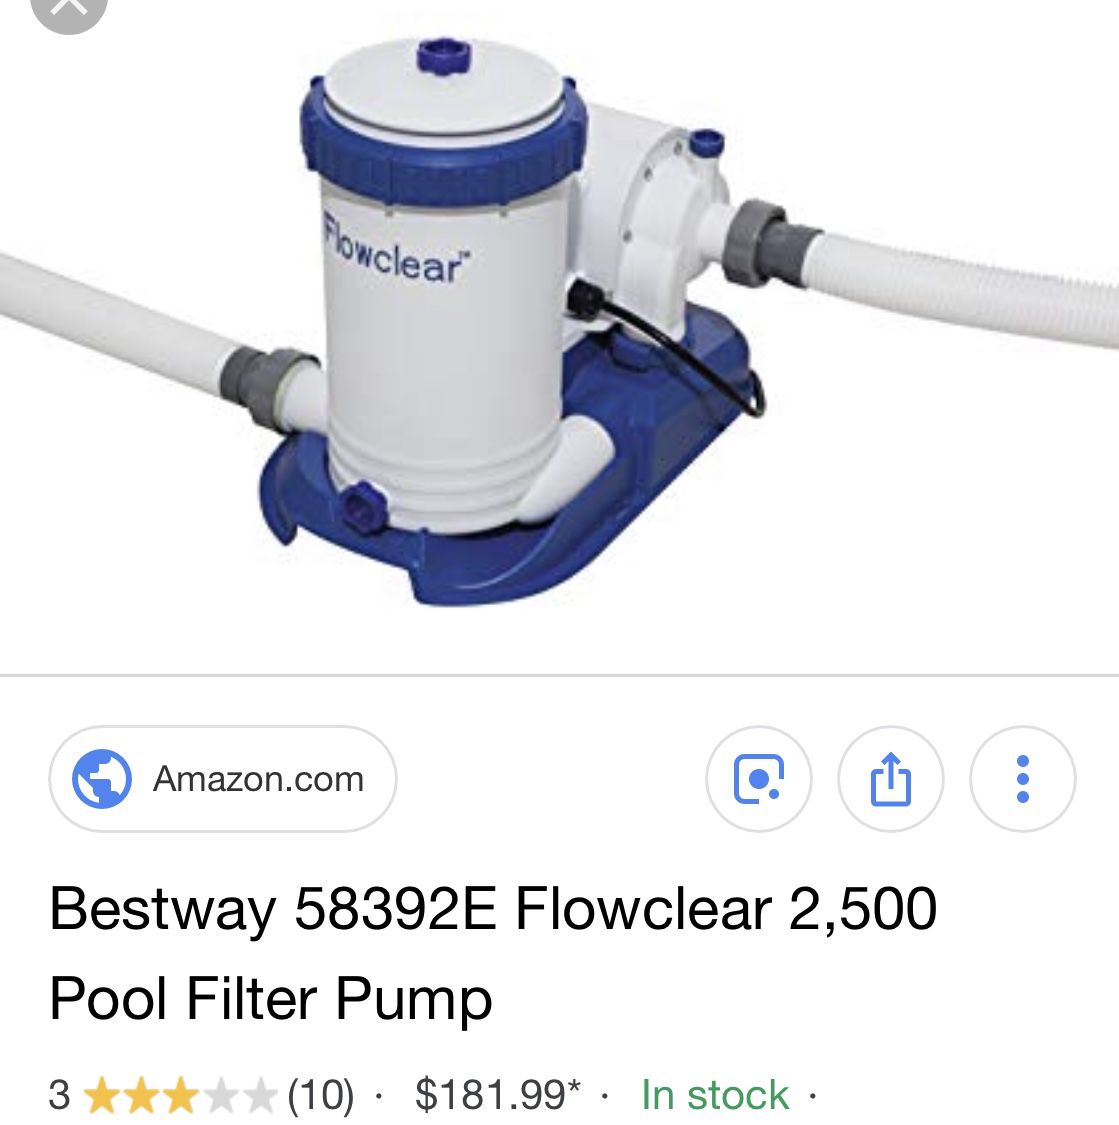 Pool filter new in box